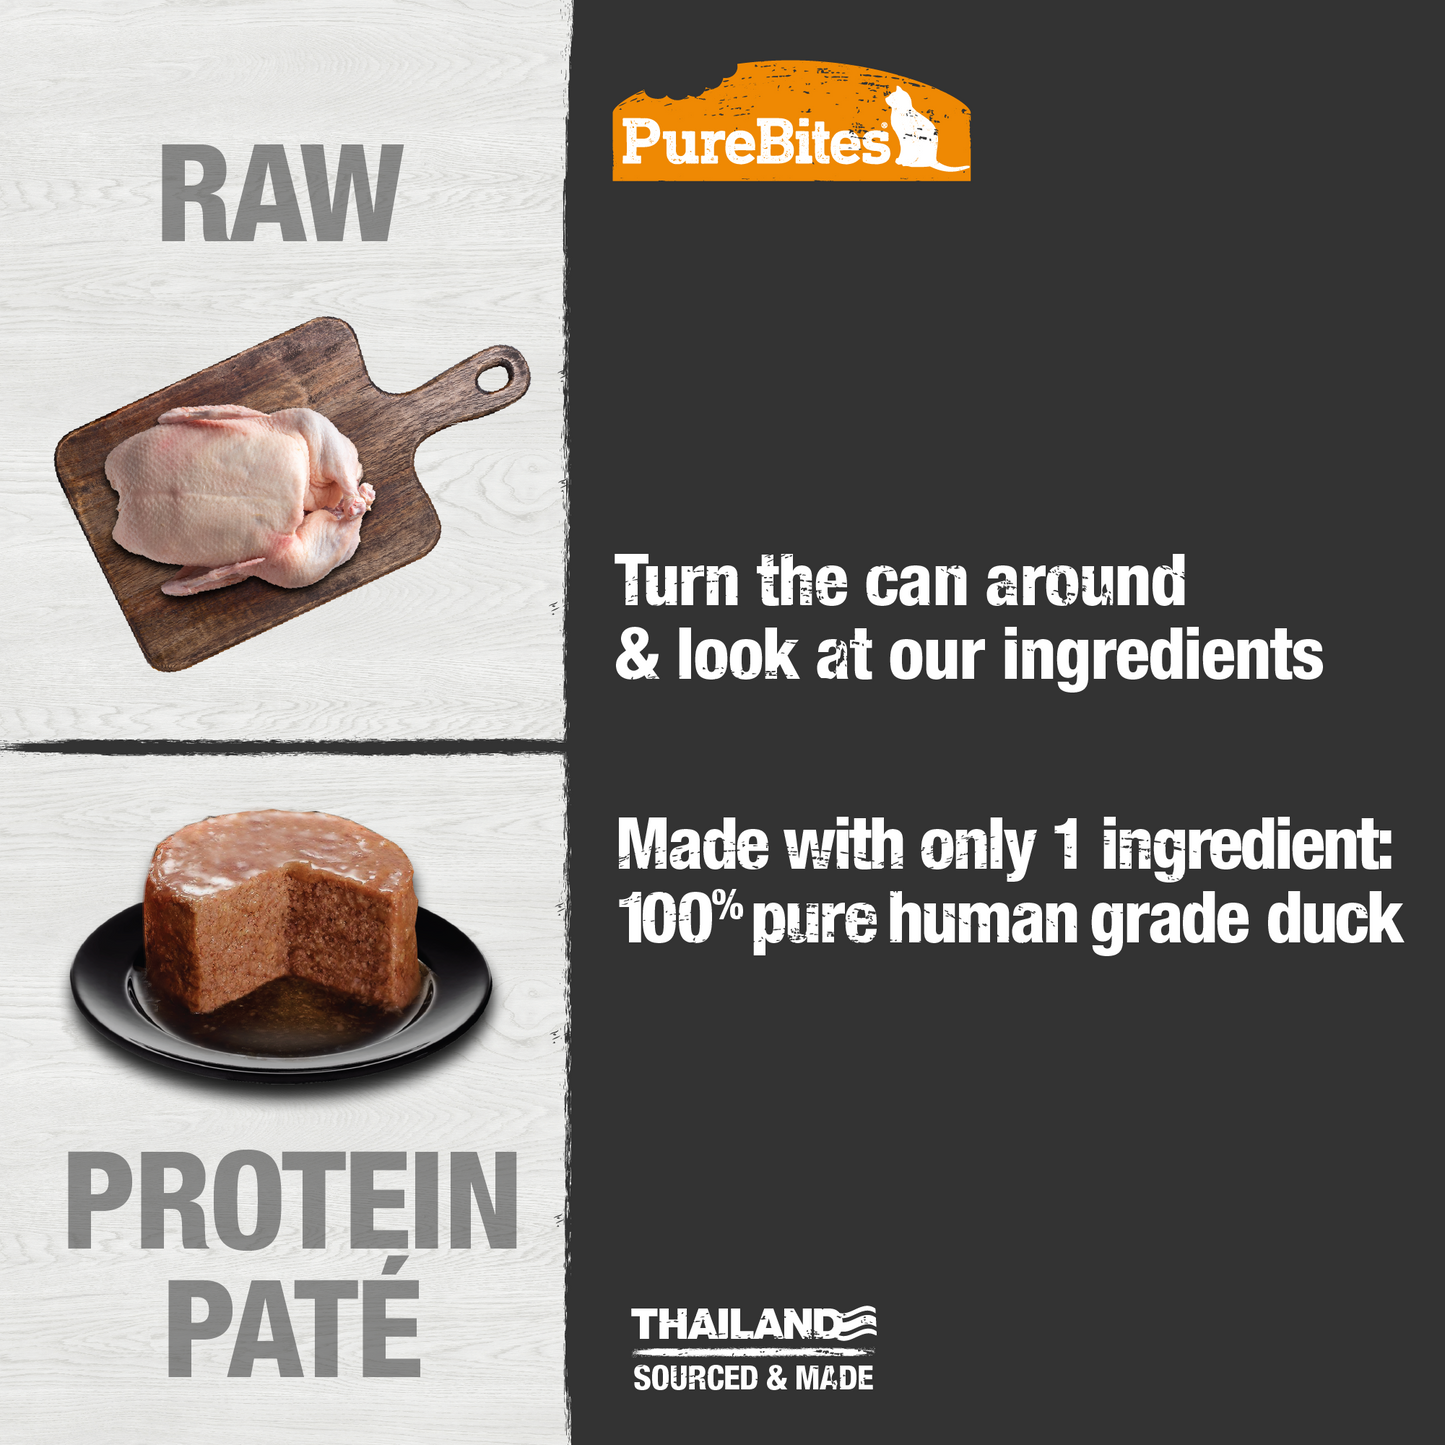 Made with only 1 Ingredient you can read, pronounce, and trust: Human grade duck.